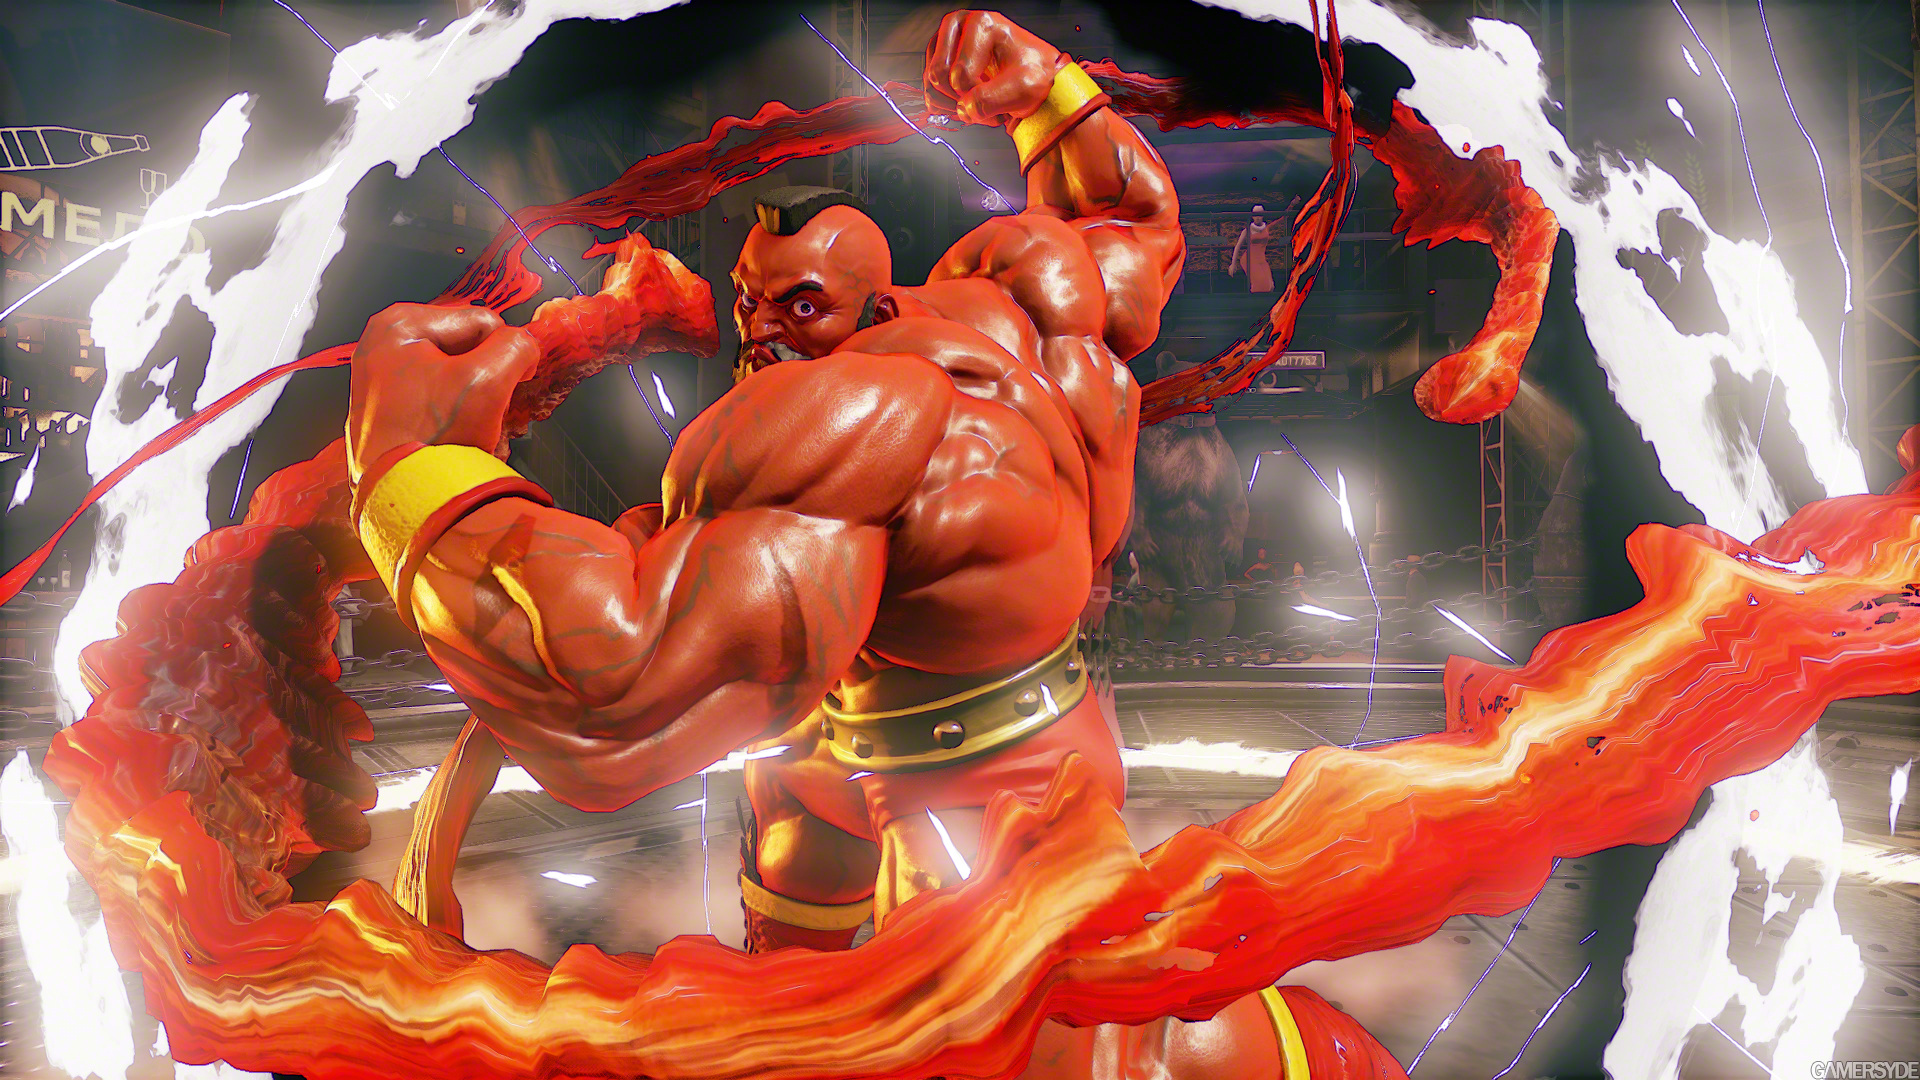 Zangief announced for Street Fighter 5